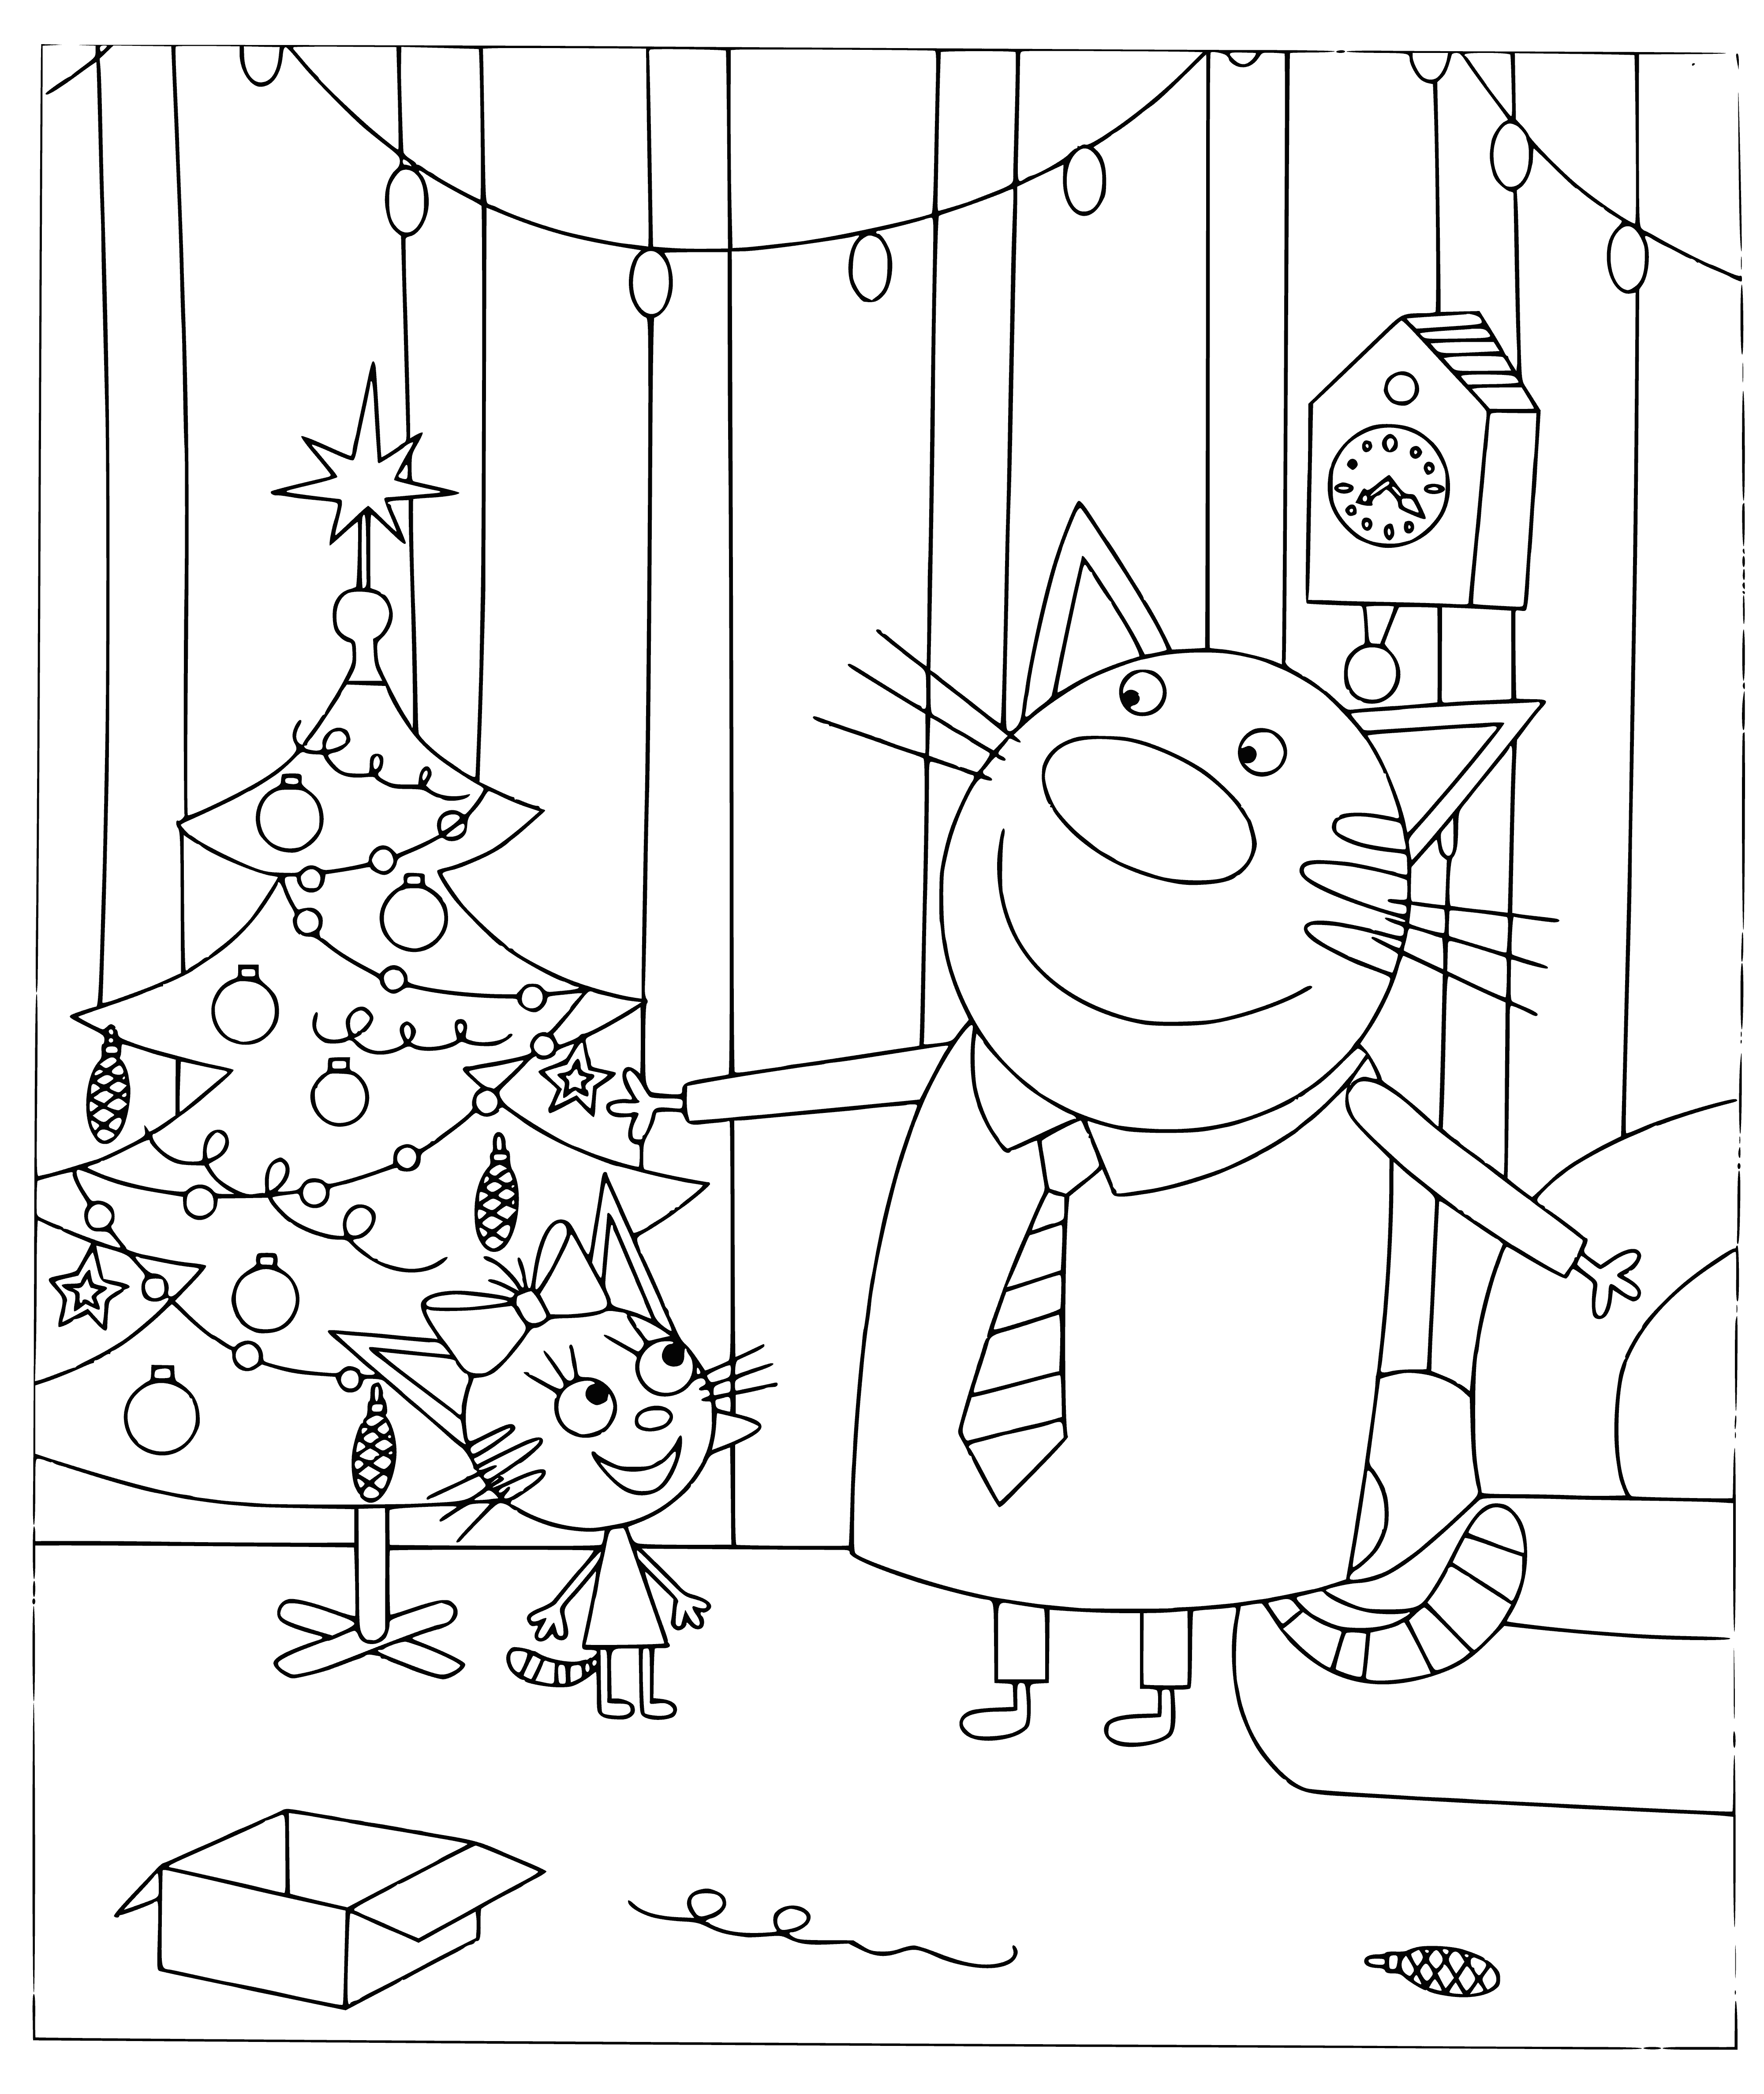 coloring page: 3 cats in coloring page: 1 stands, 1 stands next to it, and 1 sits on ground, all looking at the Christmas tree.